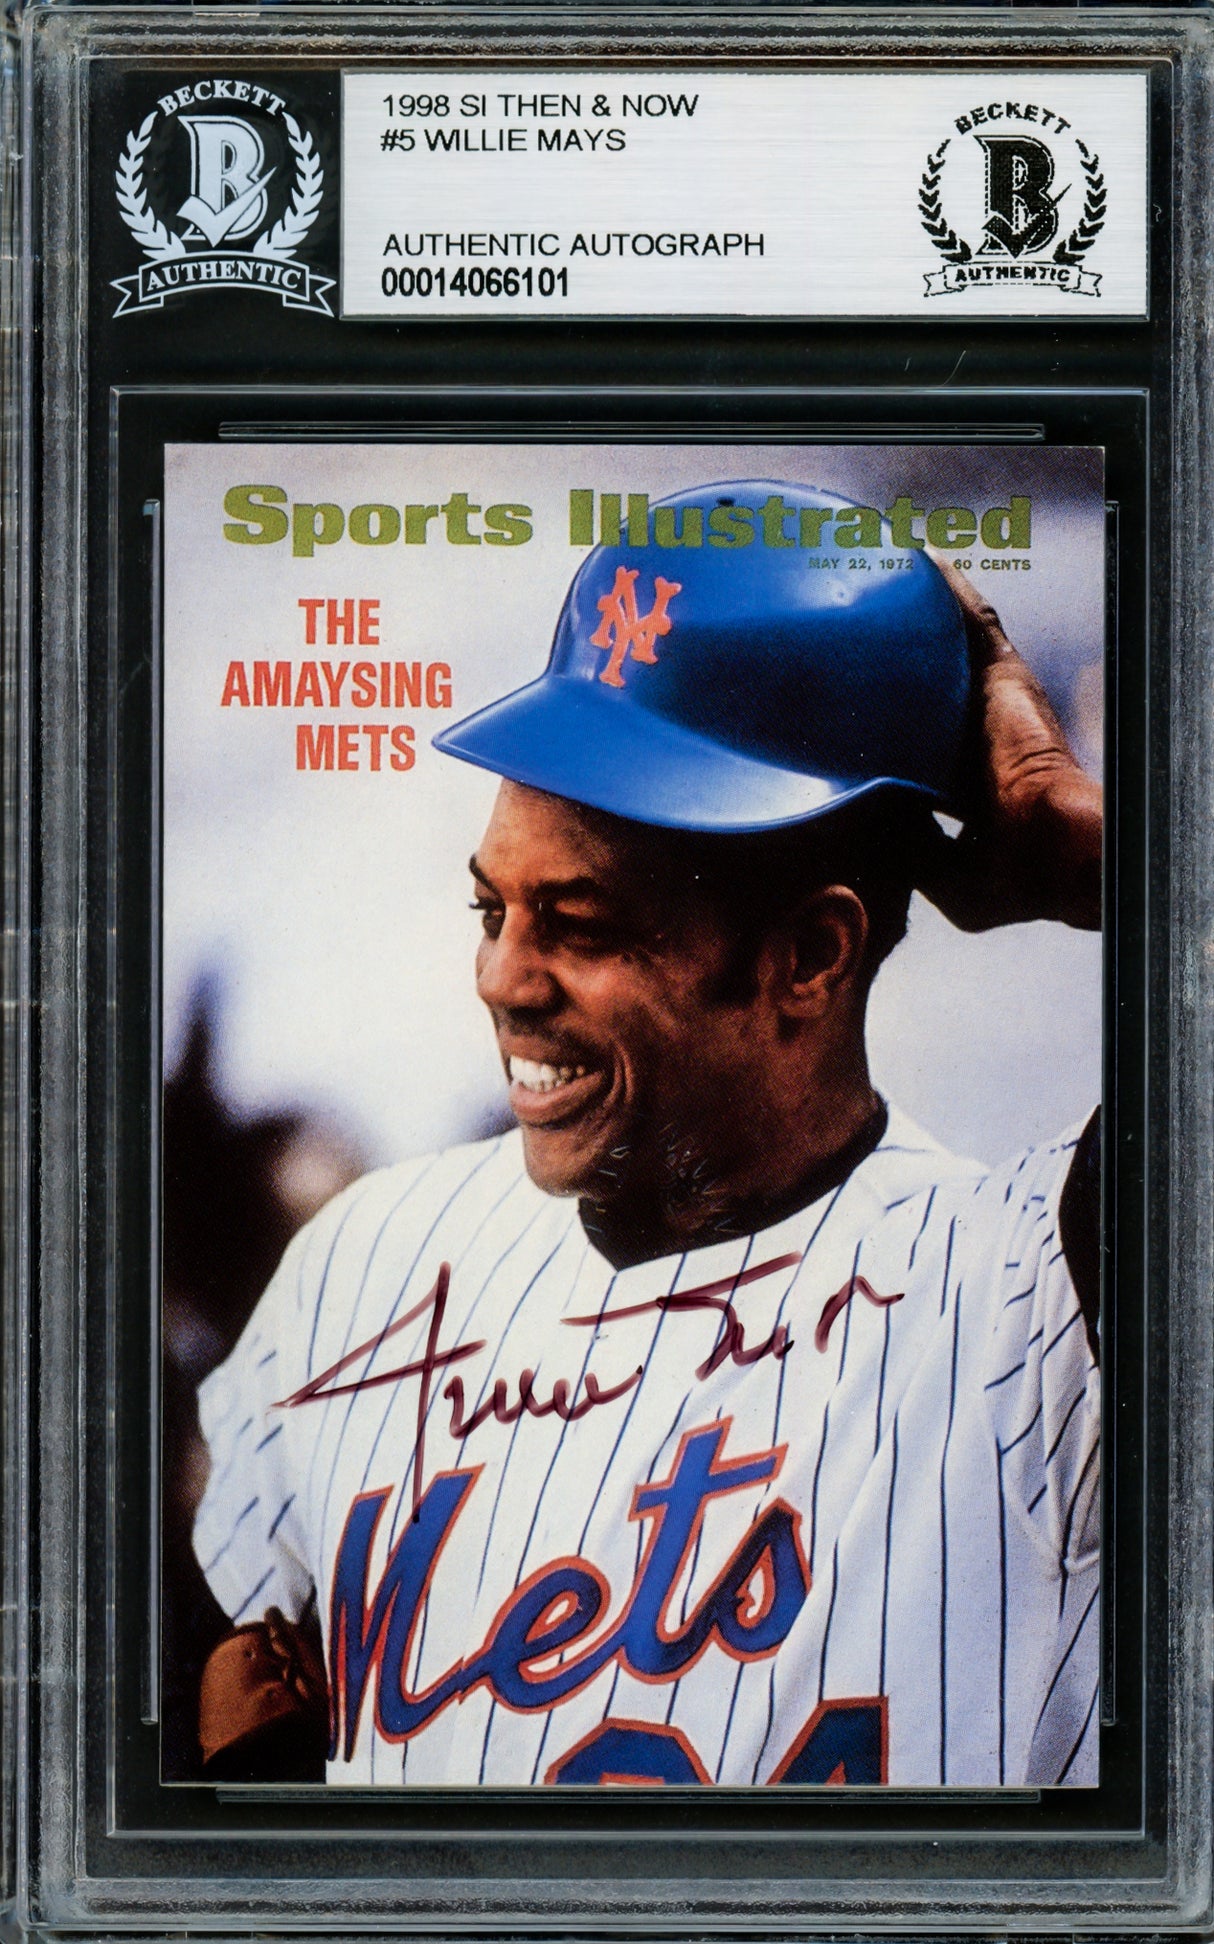 Willie Mays Autographed 1998 Fleer Sports Illustrated Card #5 New York Mets #/250 Beckett BAS #14066101